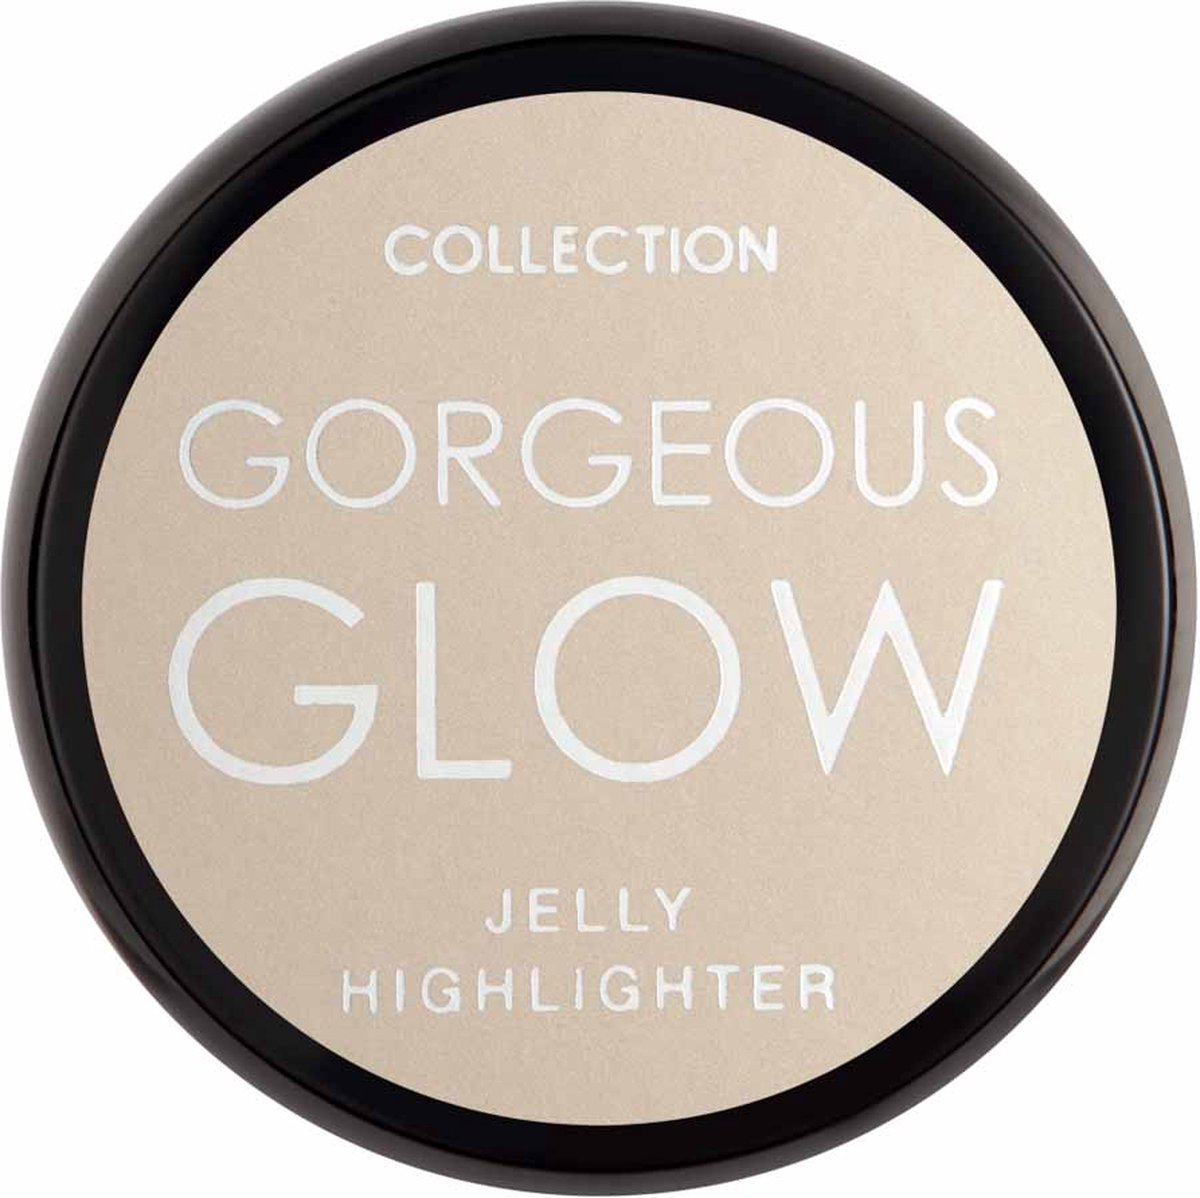 Collection Gorgeous Glow Jelly Highlighter - Royalty